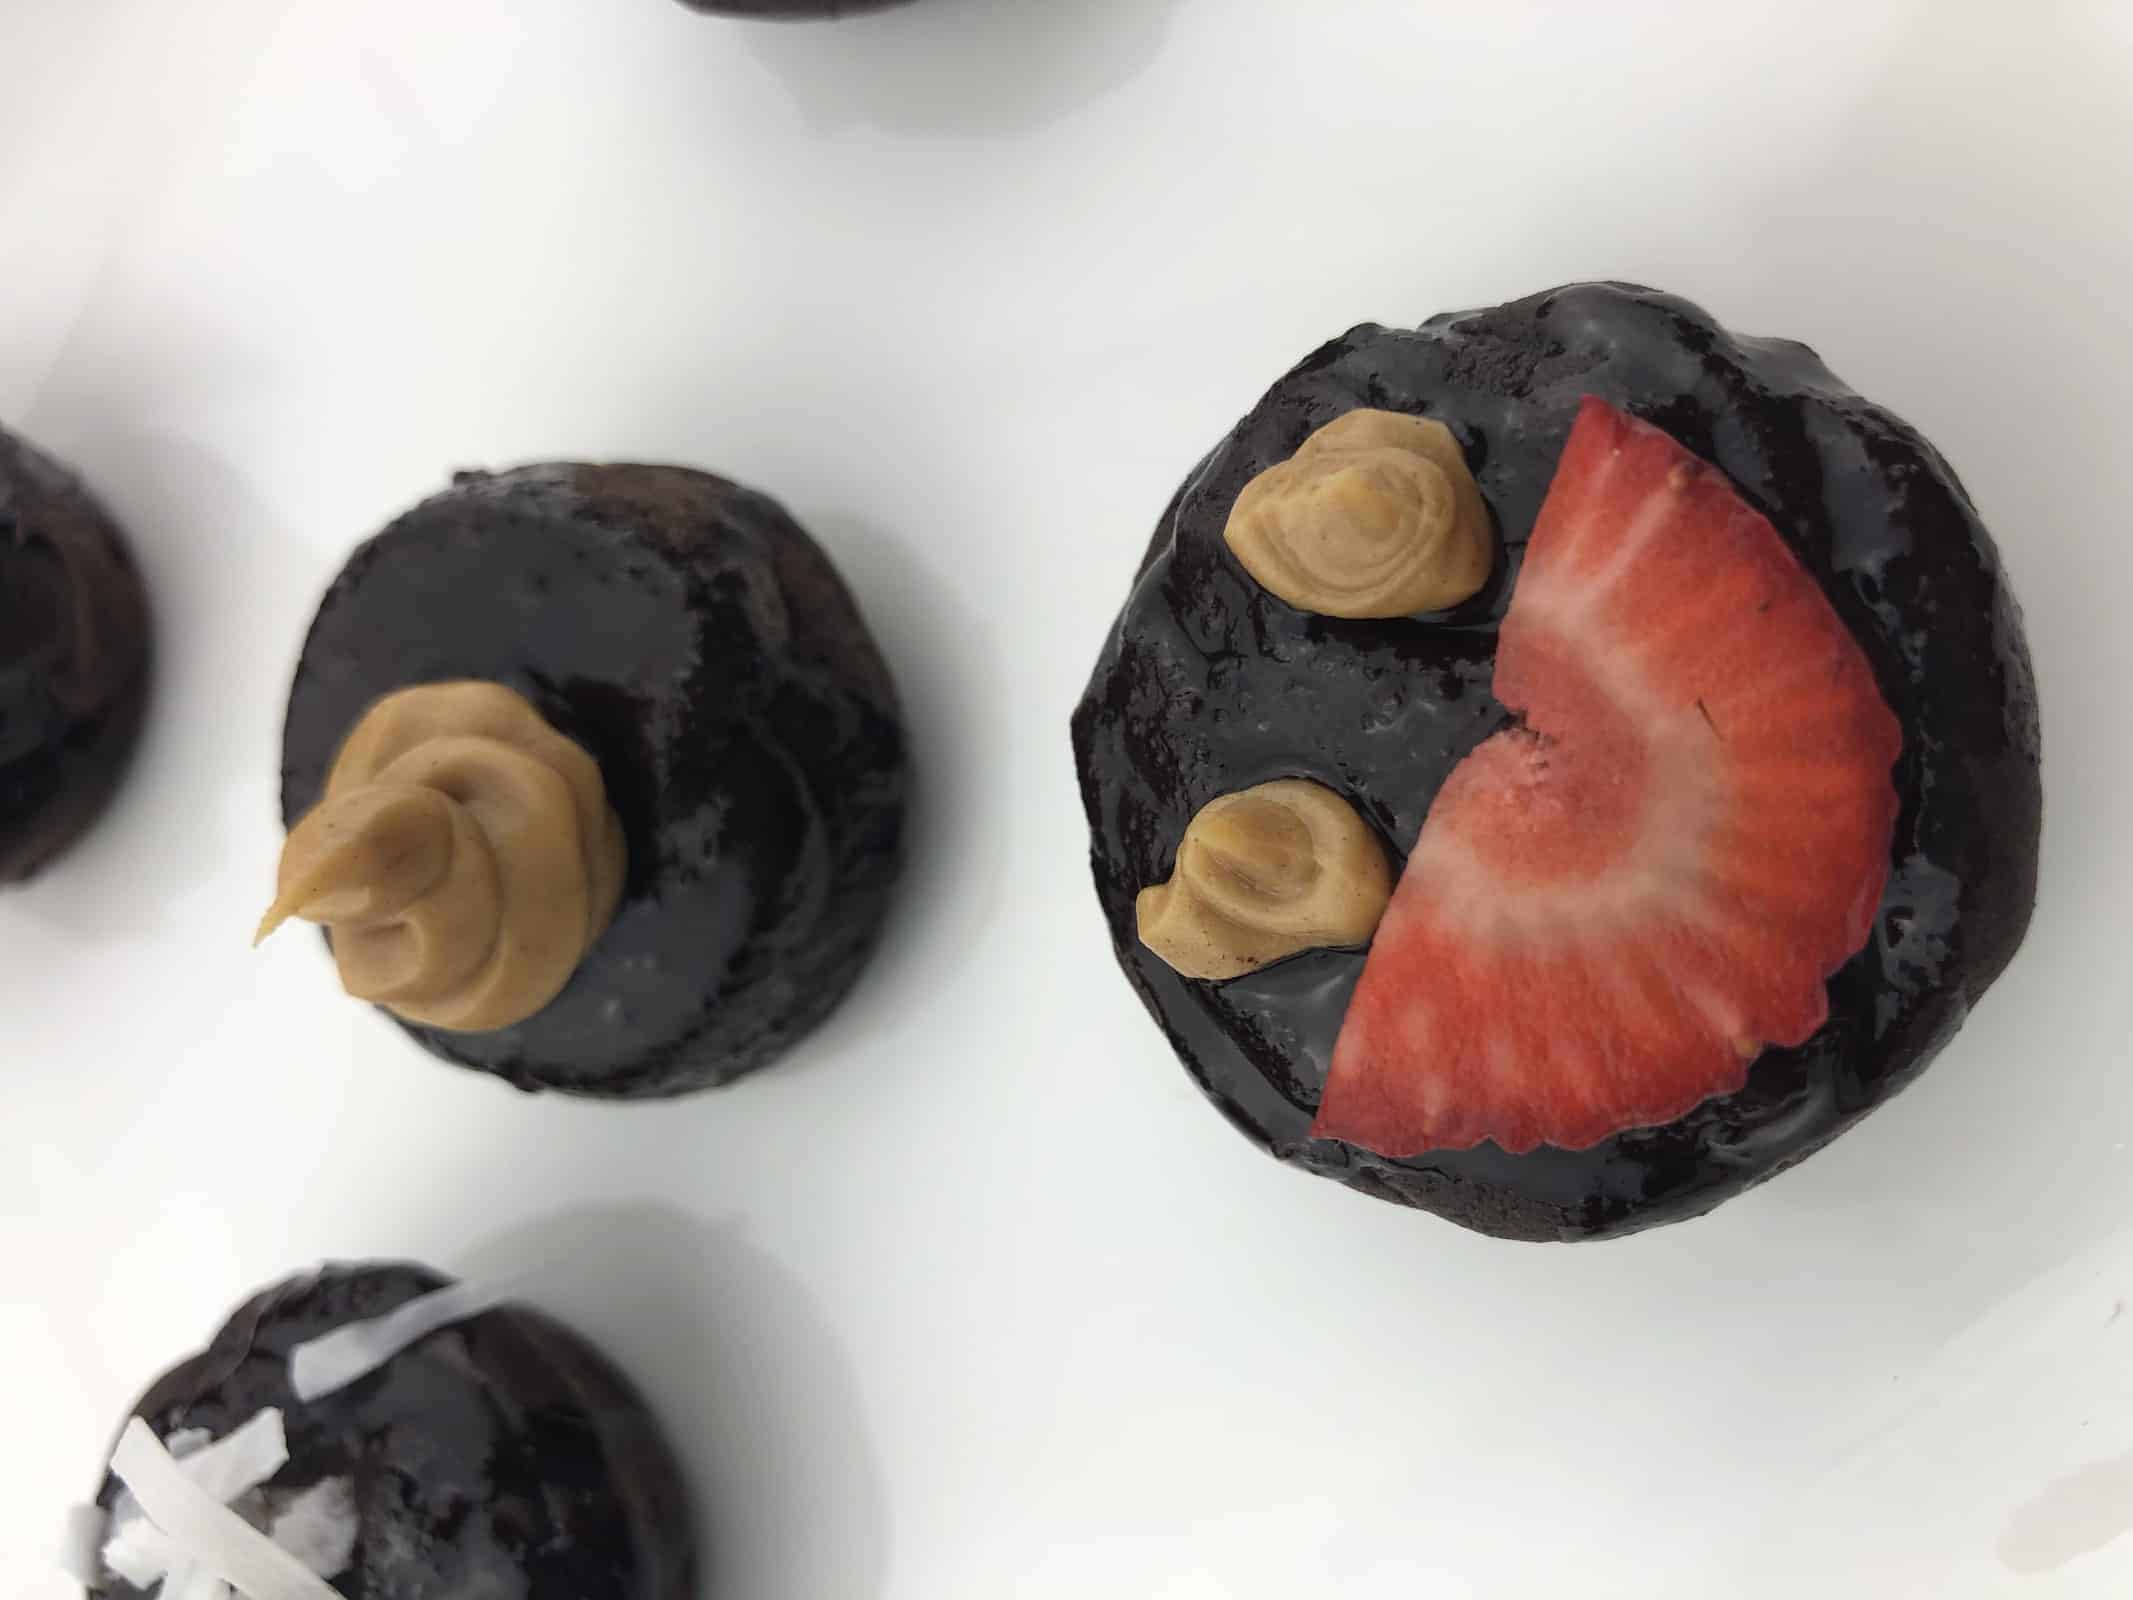 Strawberry and Peanut Butter on mini chocolate cakes